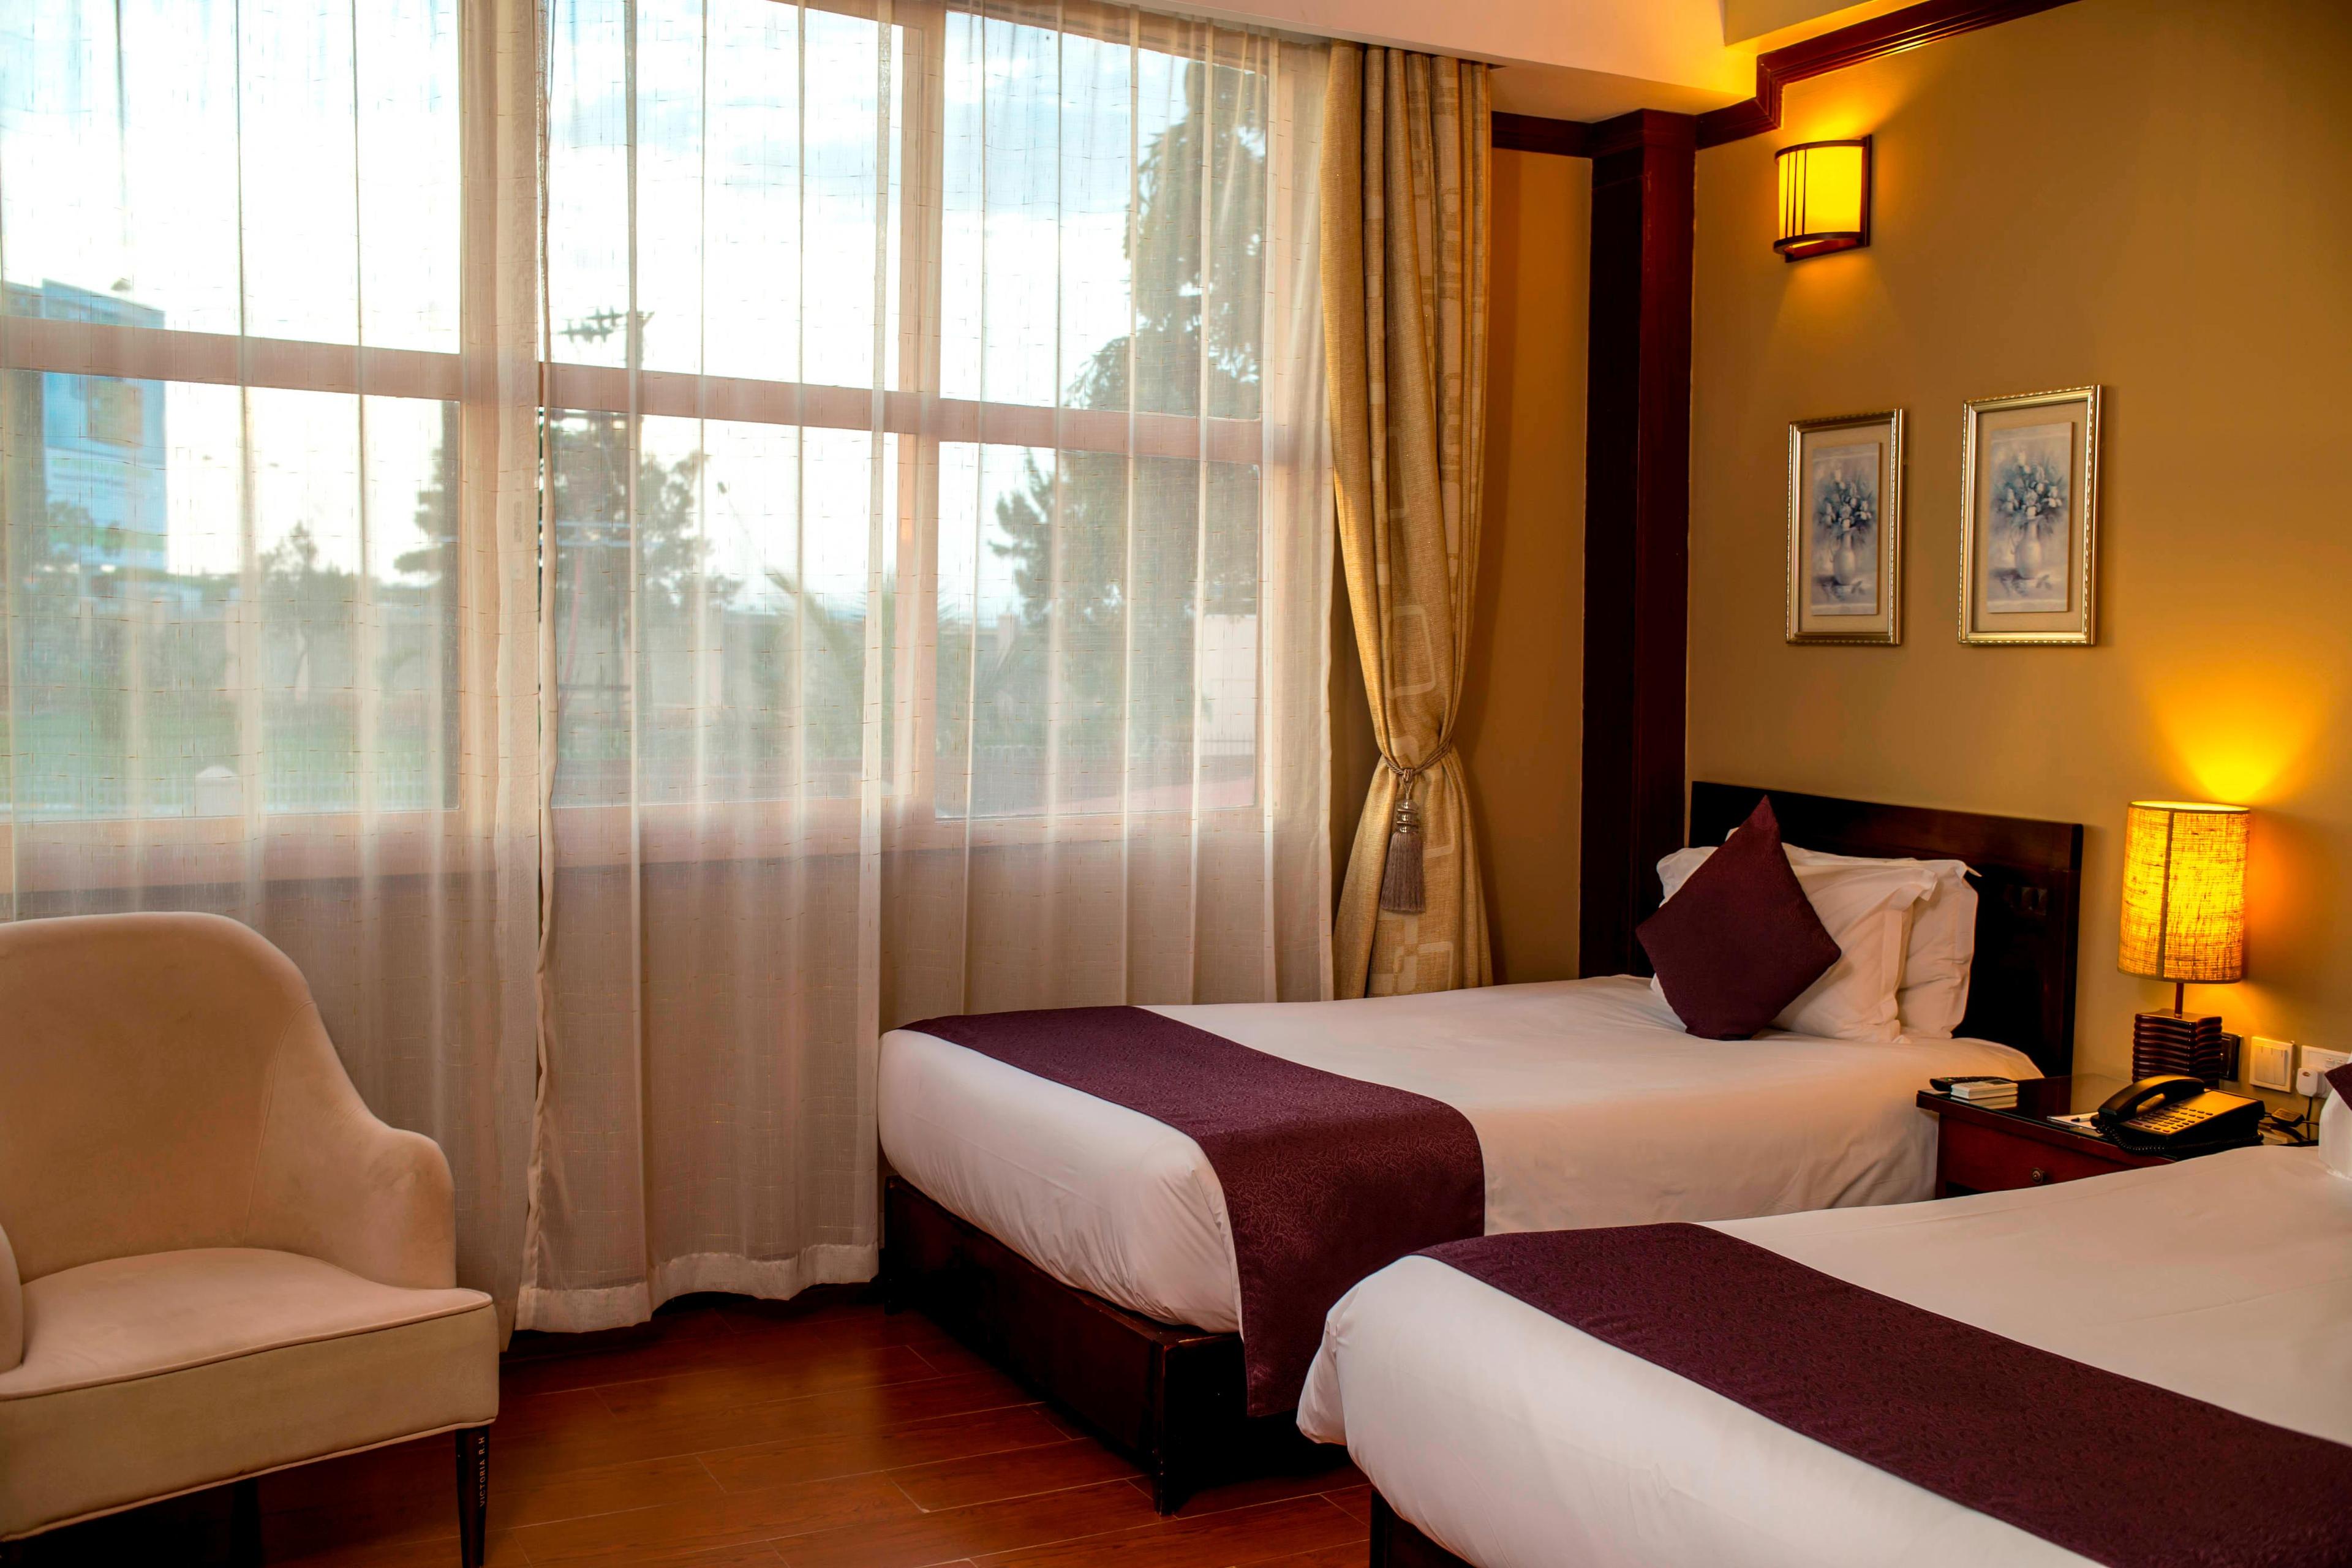 Our Standard twin guest rooms offers a luxurious and spacious stay.